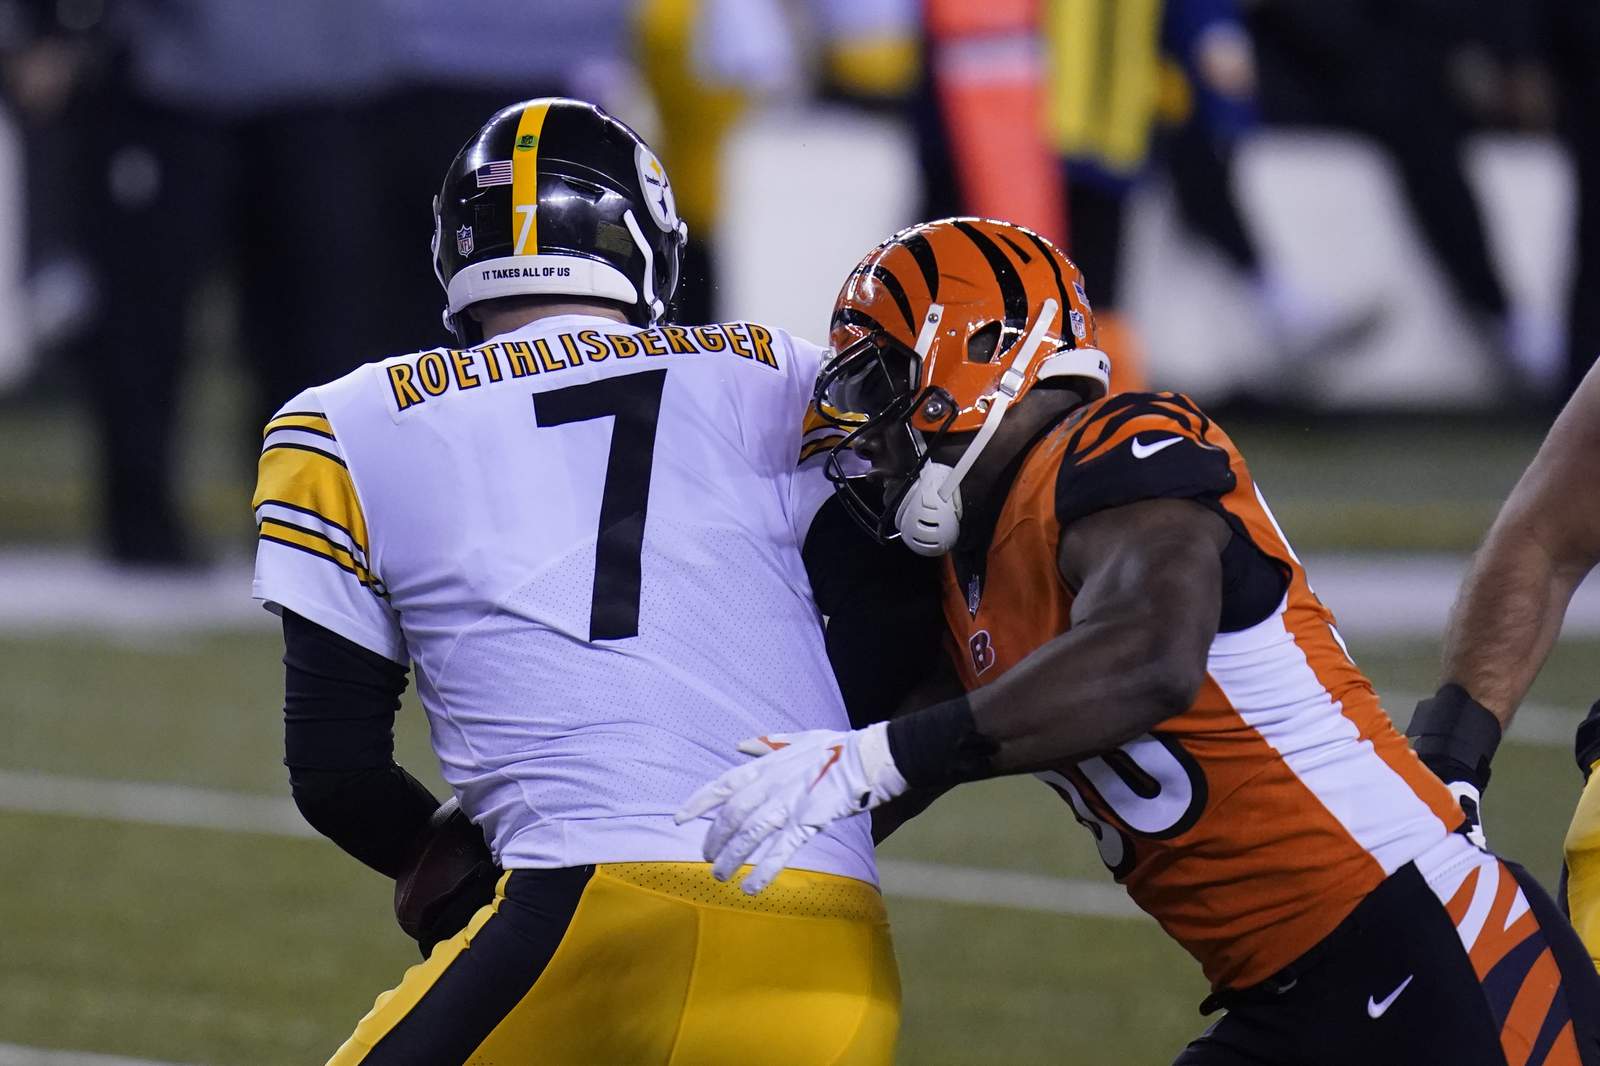 Bengals ride big first half to shocking win over Steelers